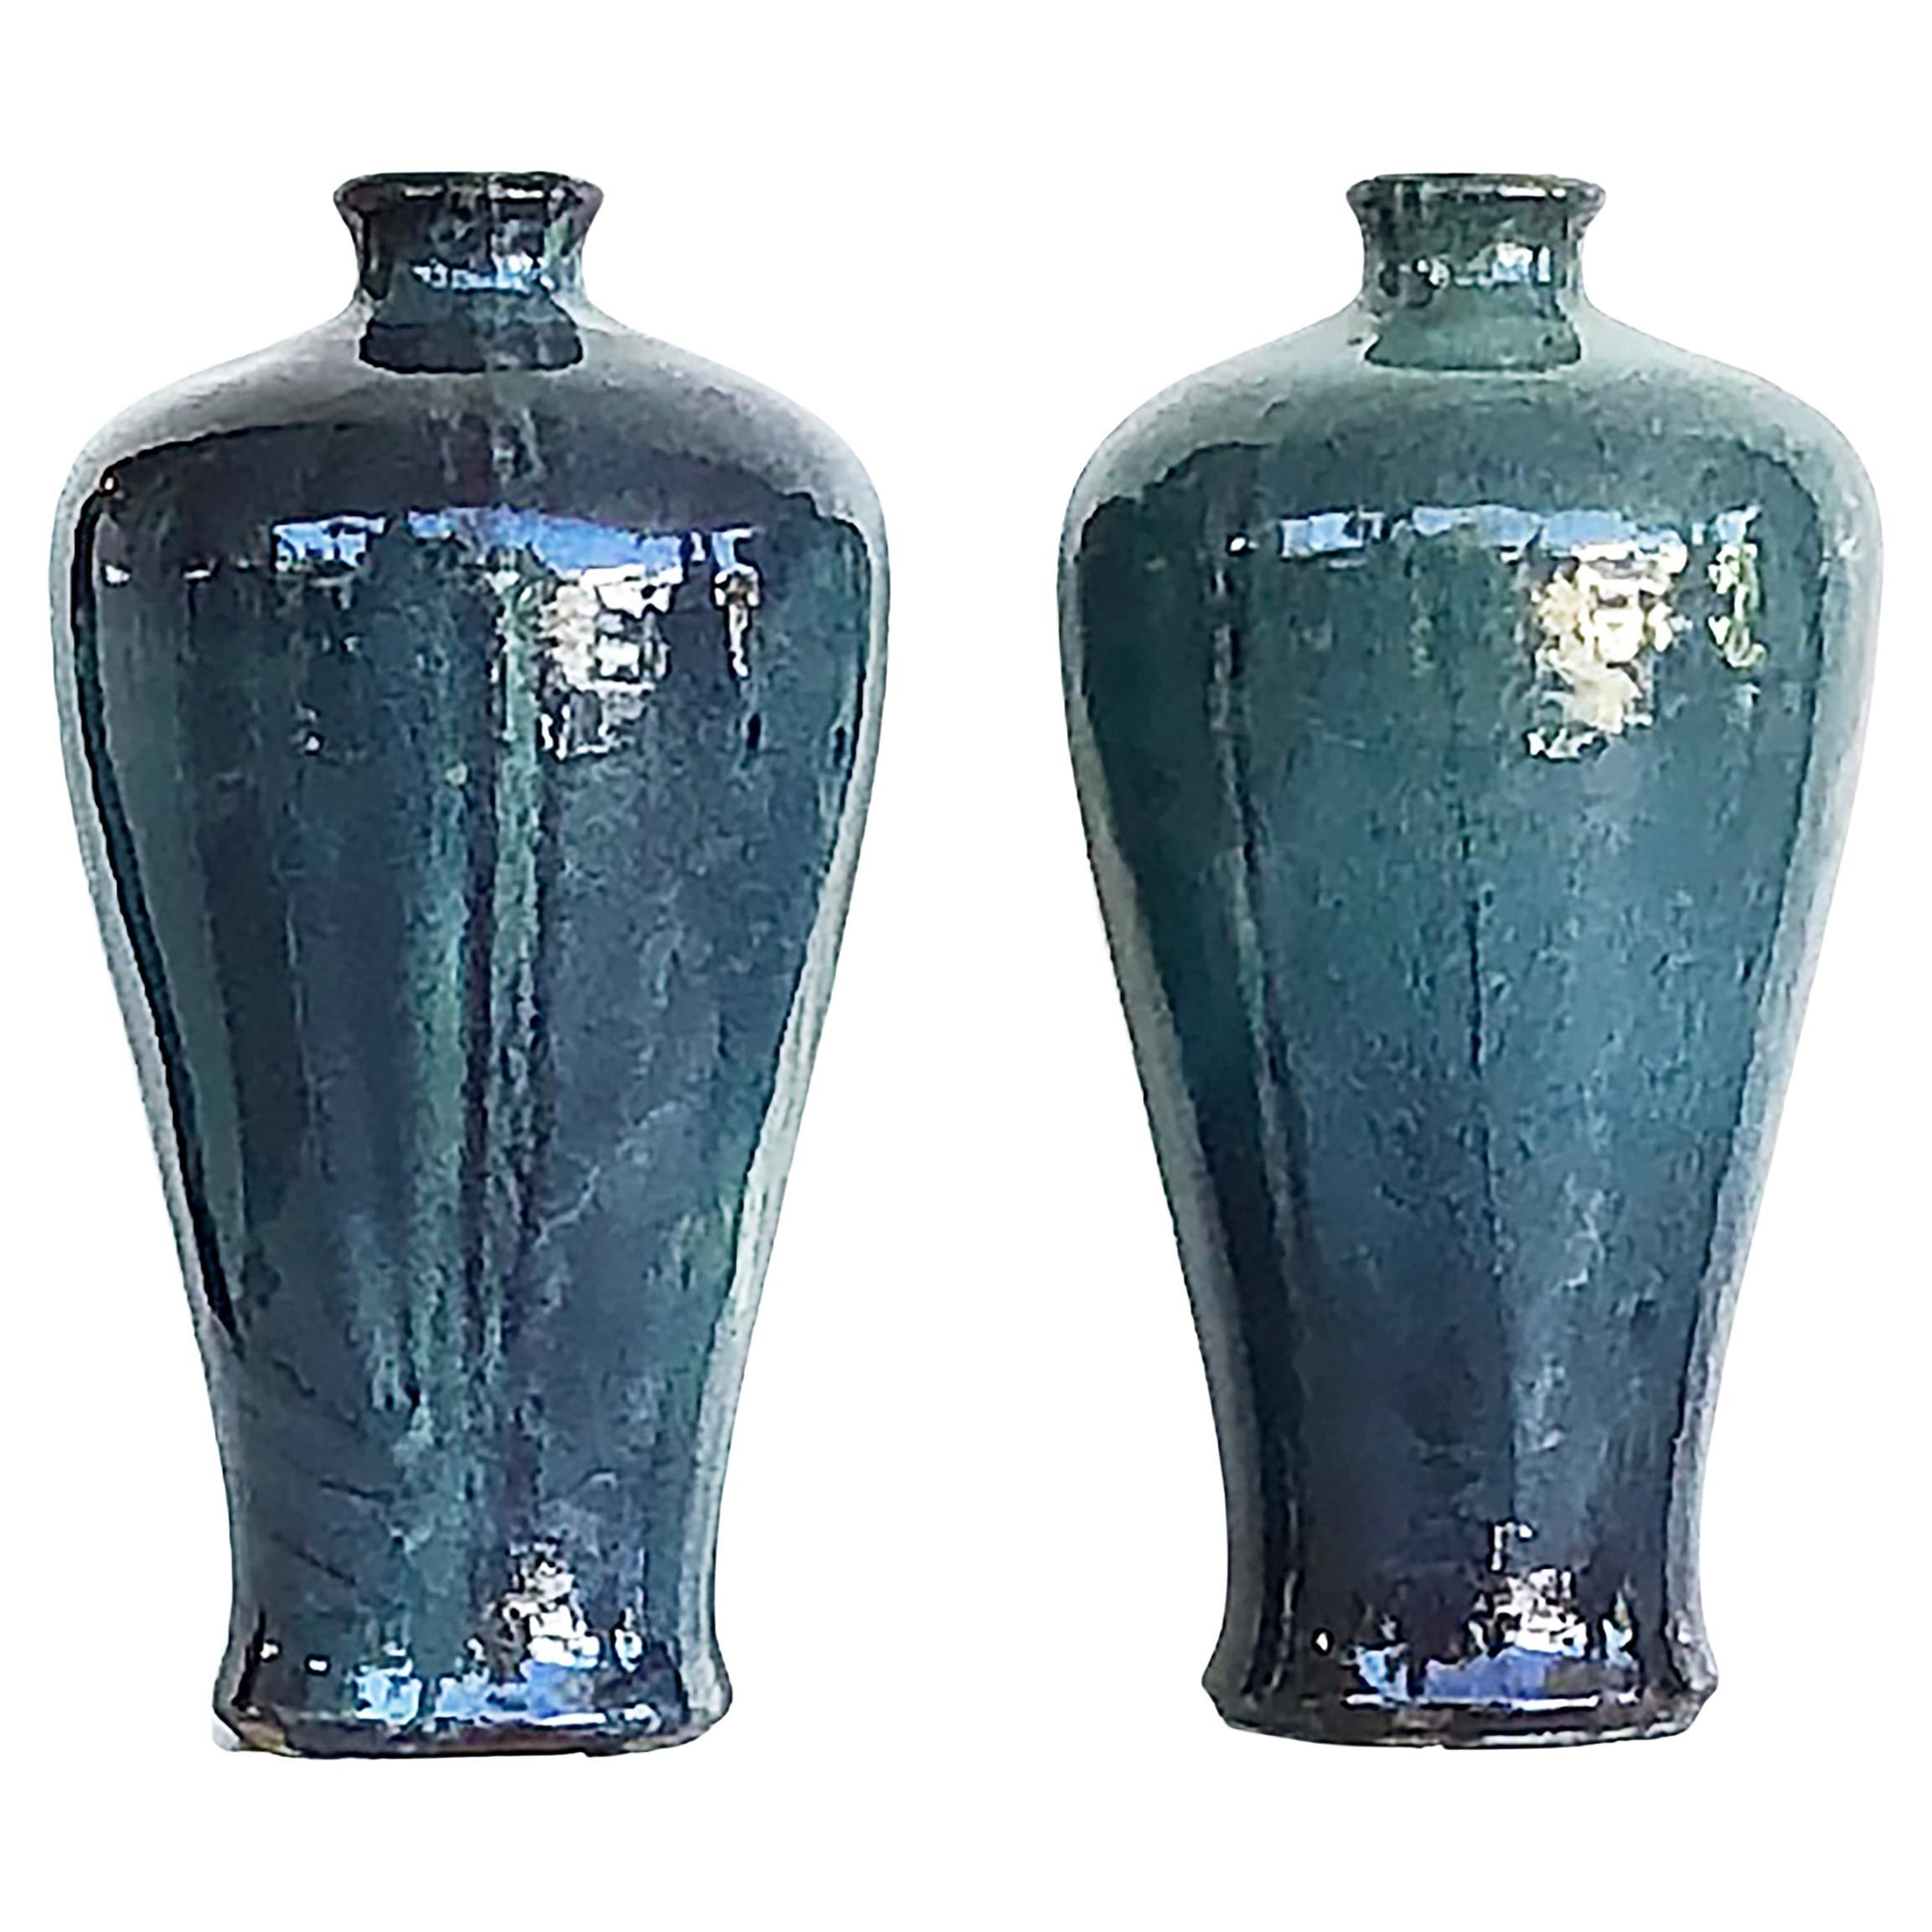 Chinese Blue Drip Glazed Ceramic Urn Vases, a Pair For Sale